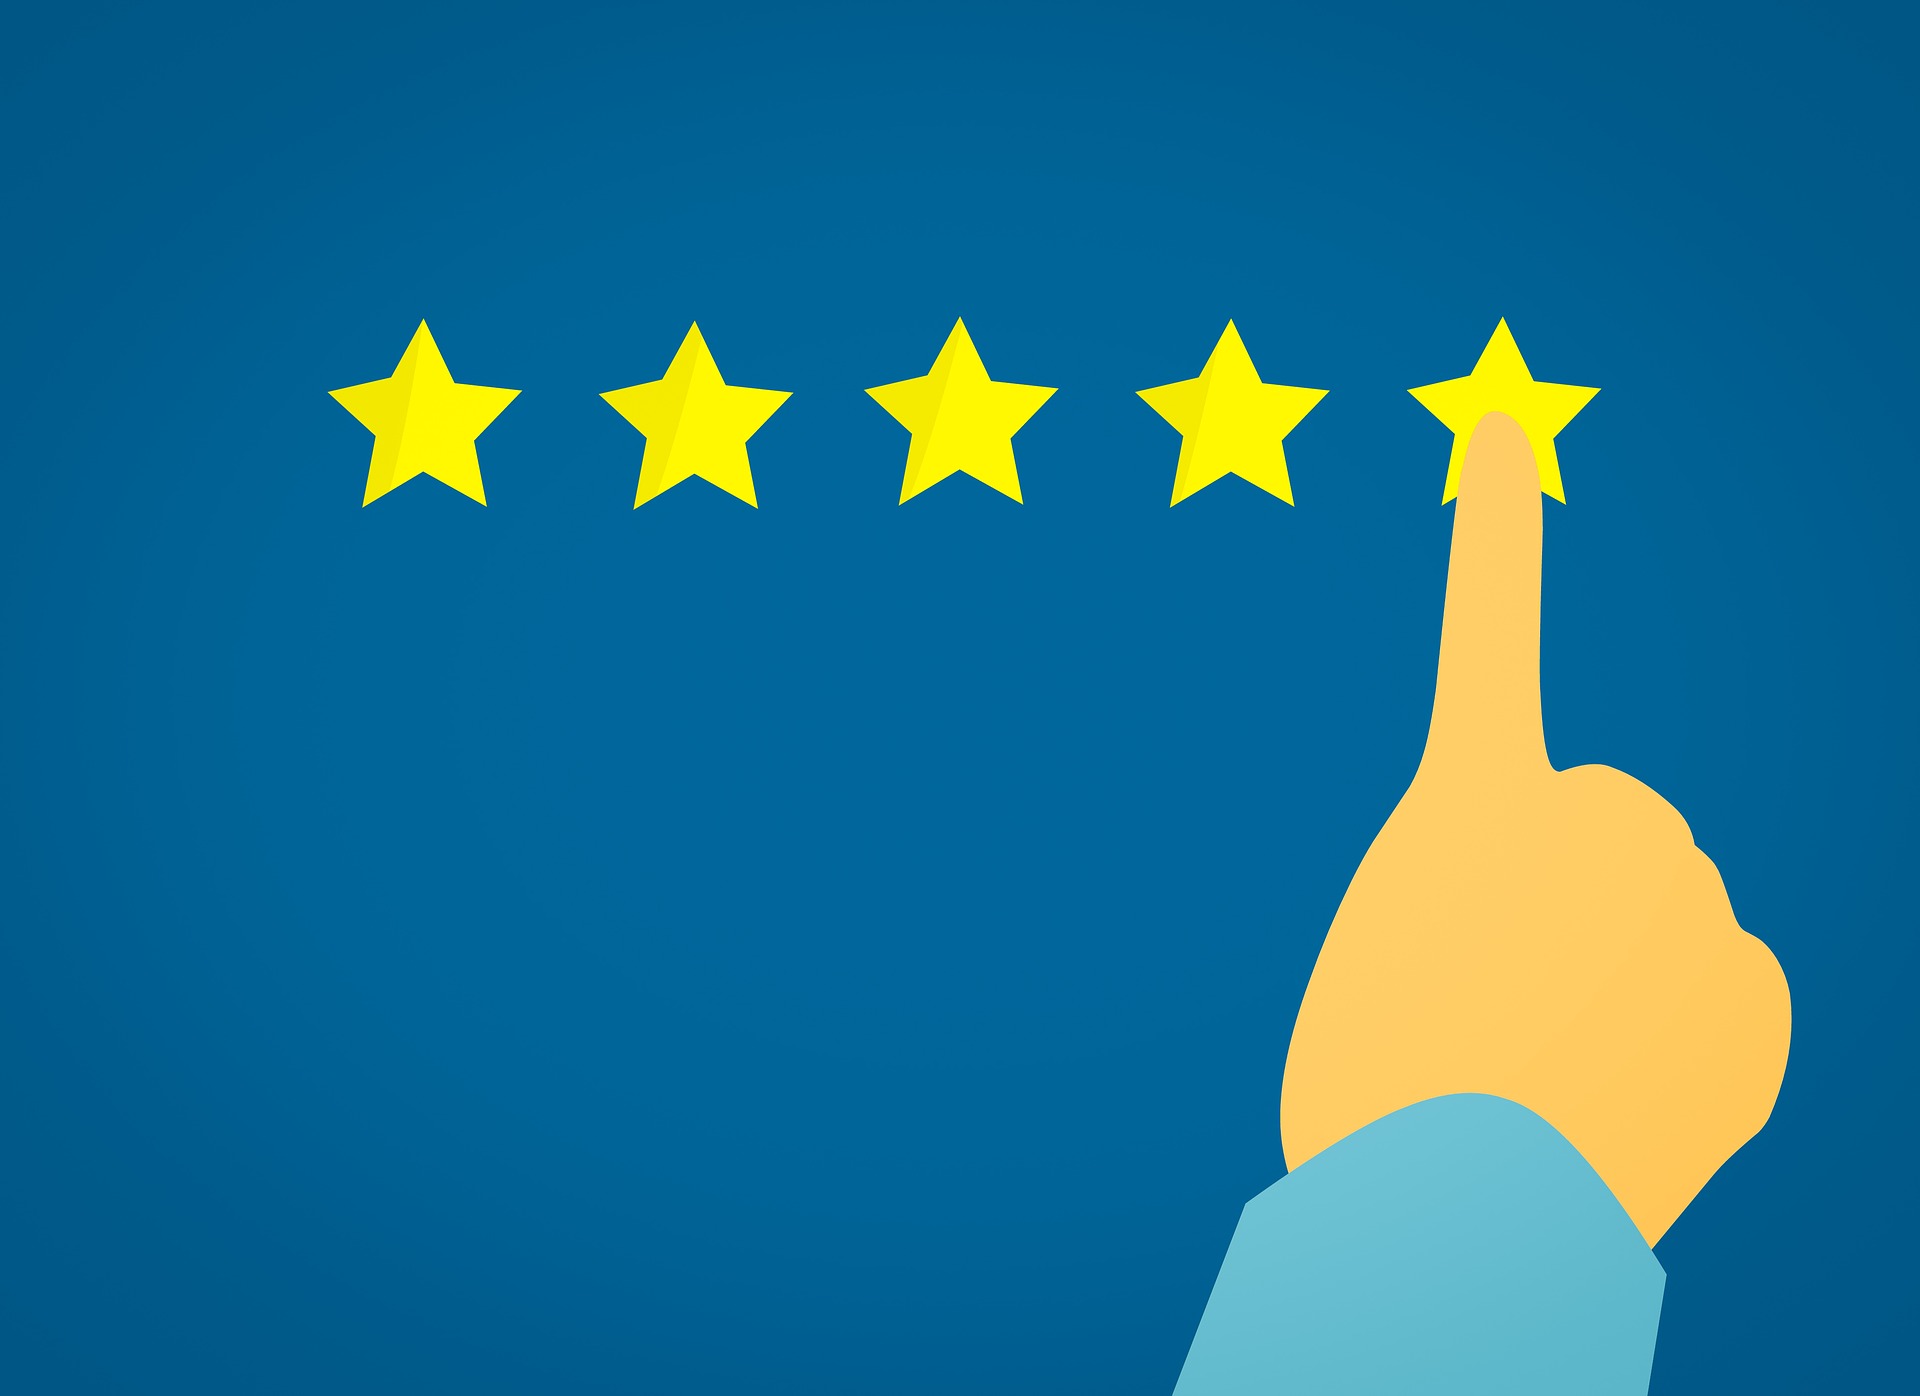 CMS Care Compare has awarded Saint Anthony a 5 star rating for overall quality for February!